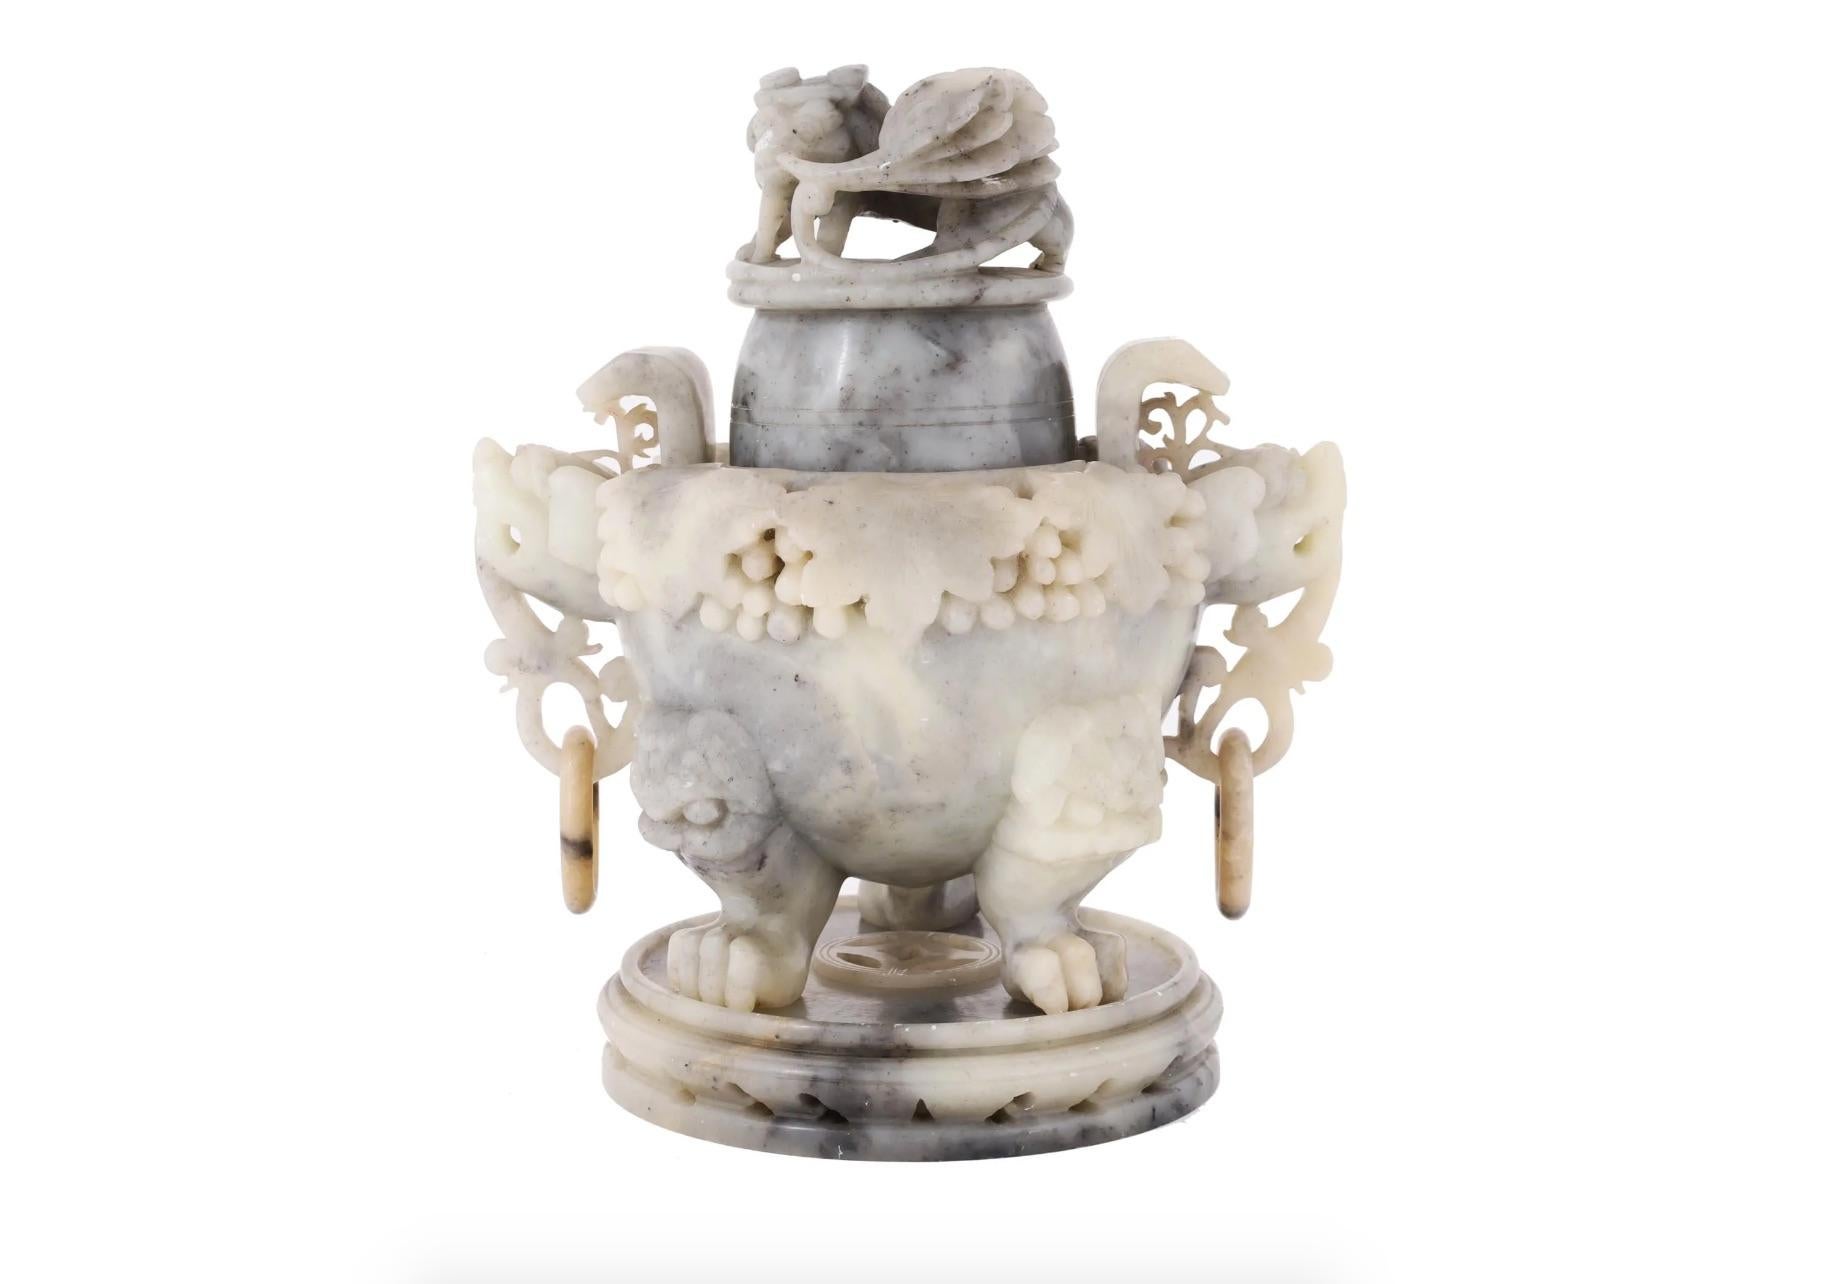 An antique Chinese covered figural hand carved White Jade desk incense burner. The base is adorned with a relief grapevine motif, and mounted on figural legs made in the shape of three paws, a pair of rings on the sides. The finial is adorned with a